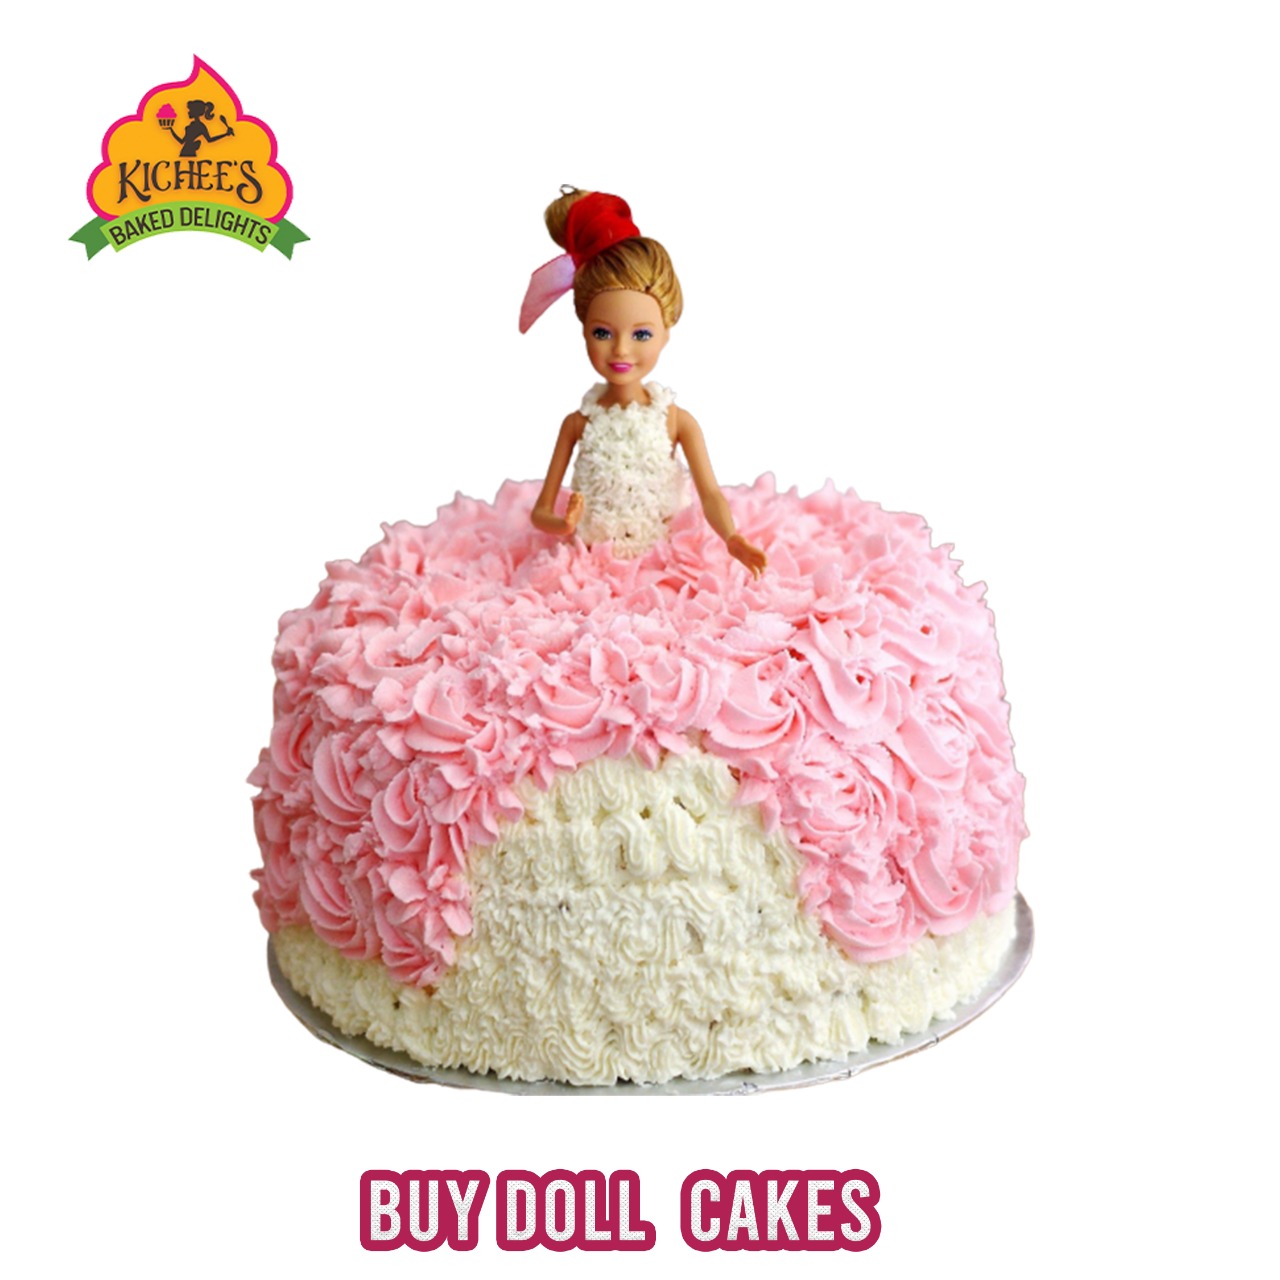 Doll cakes-invite Barbie to your birthday party